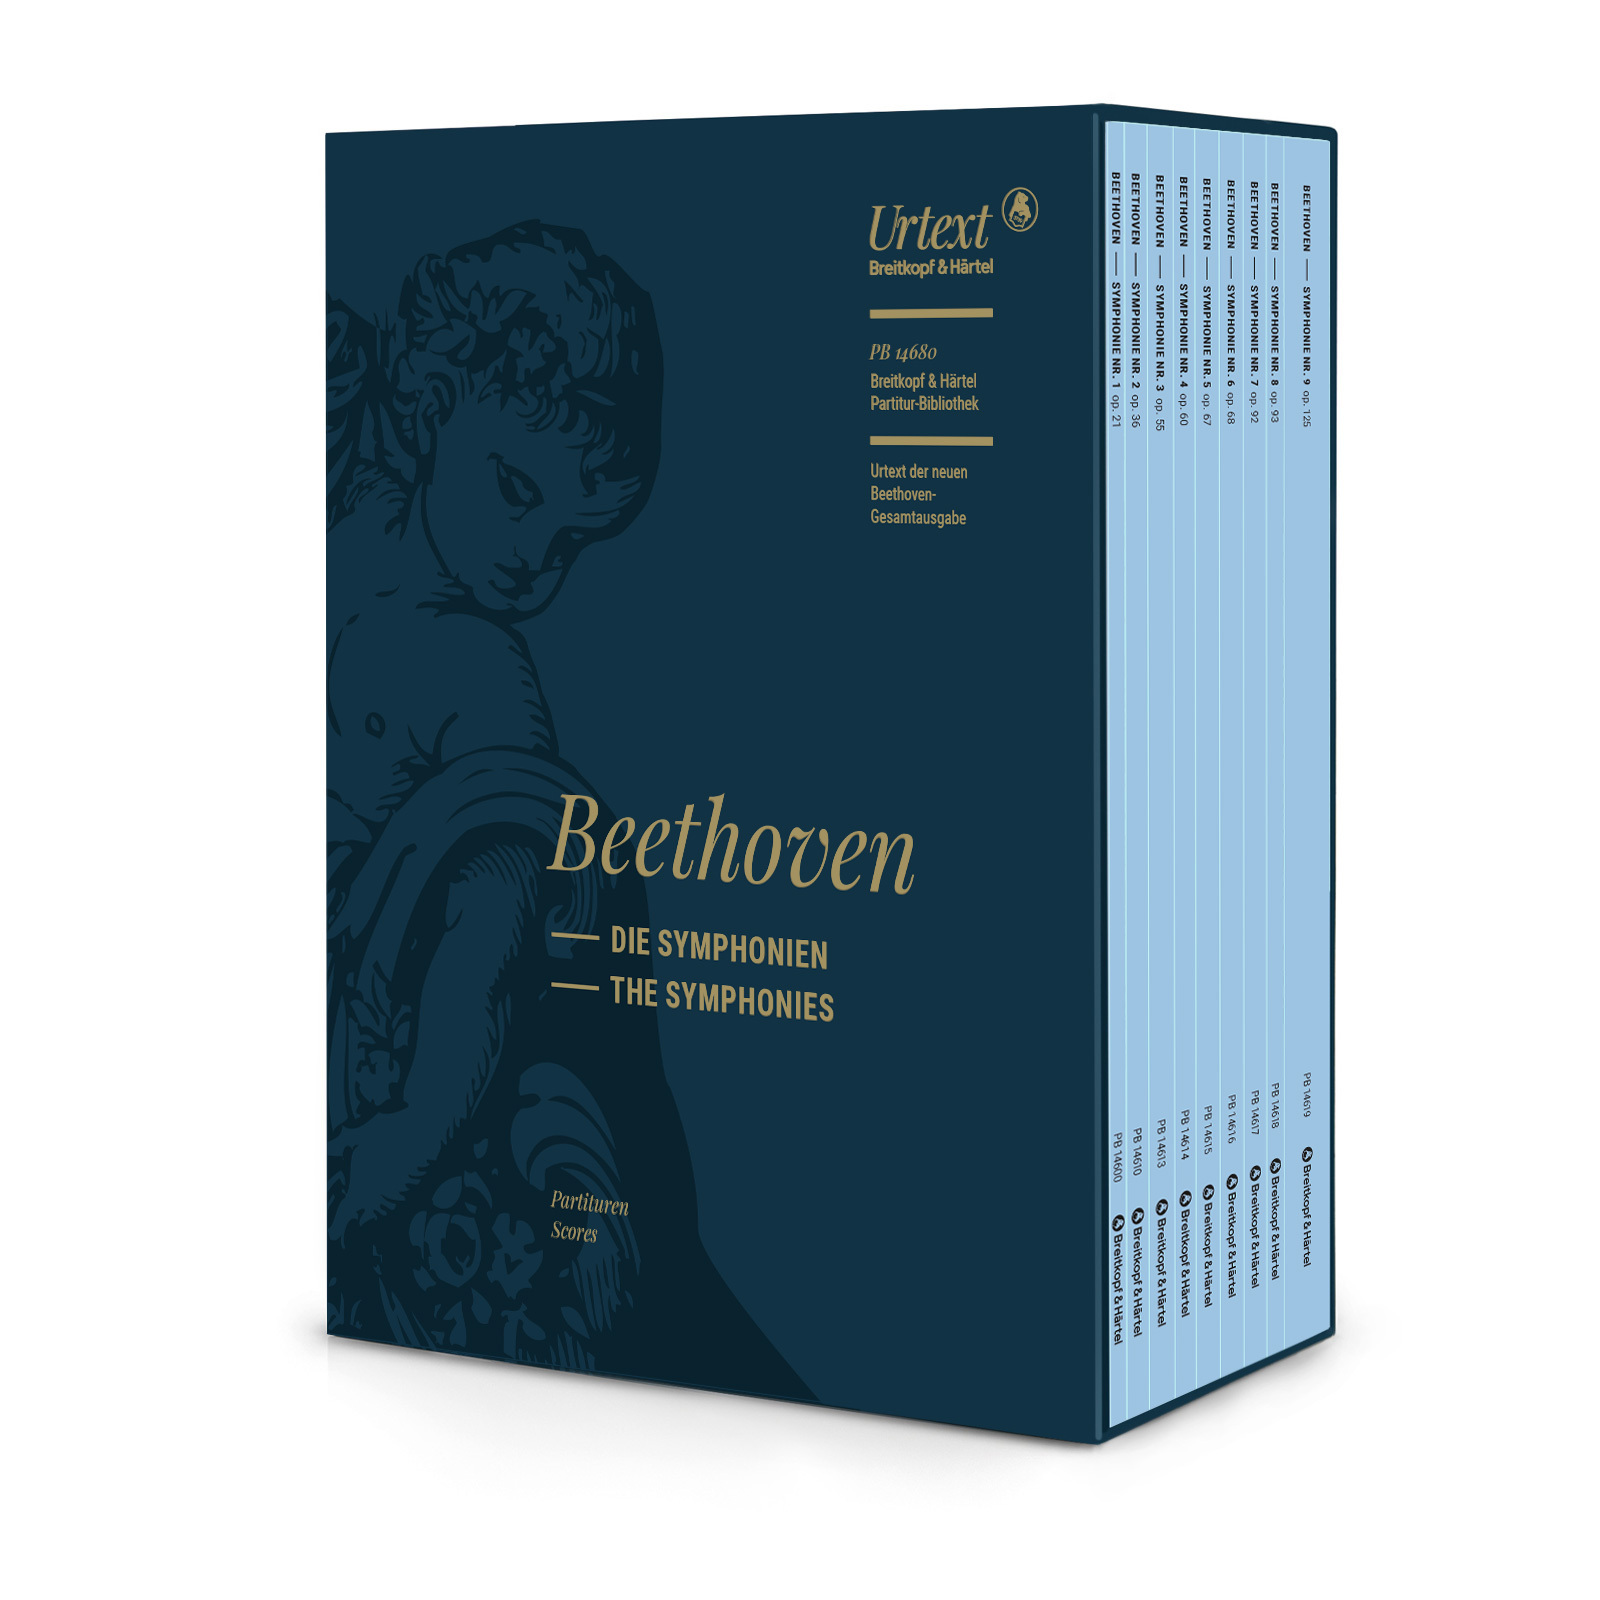 Beethoven The Symphonies 9 Scores In Slipcase Sheet Music Songbook